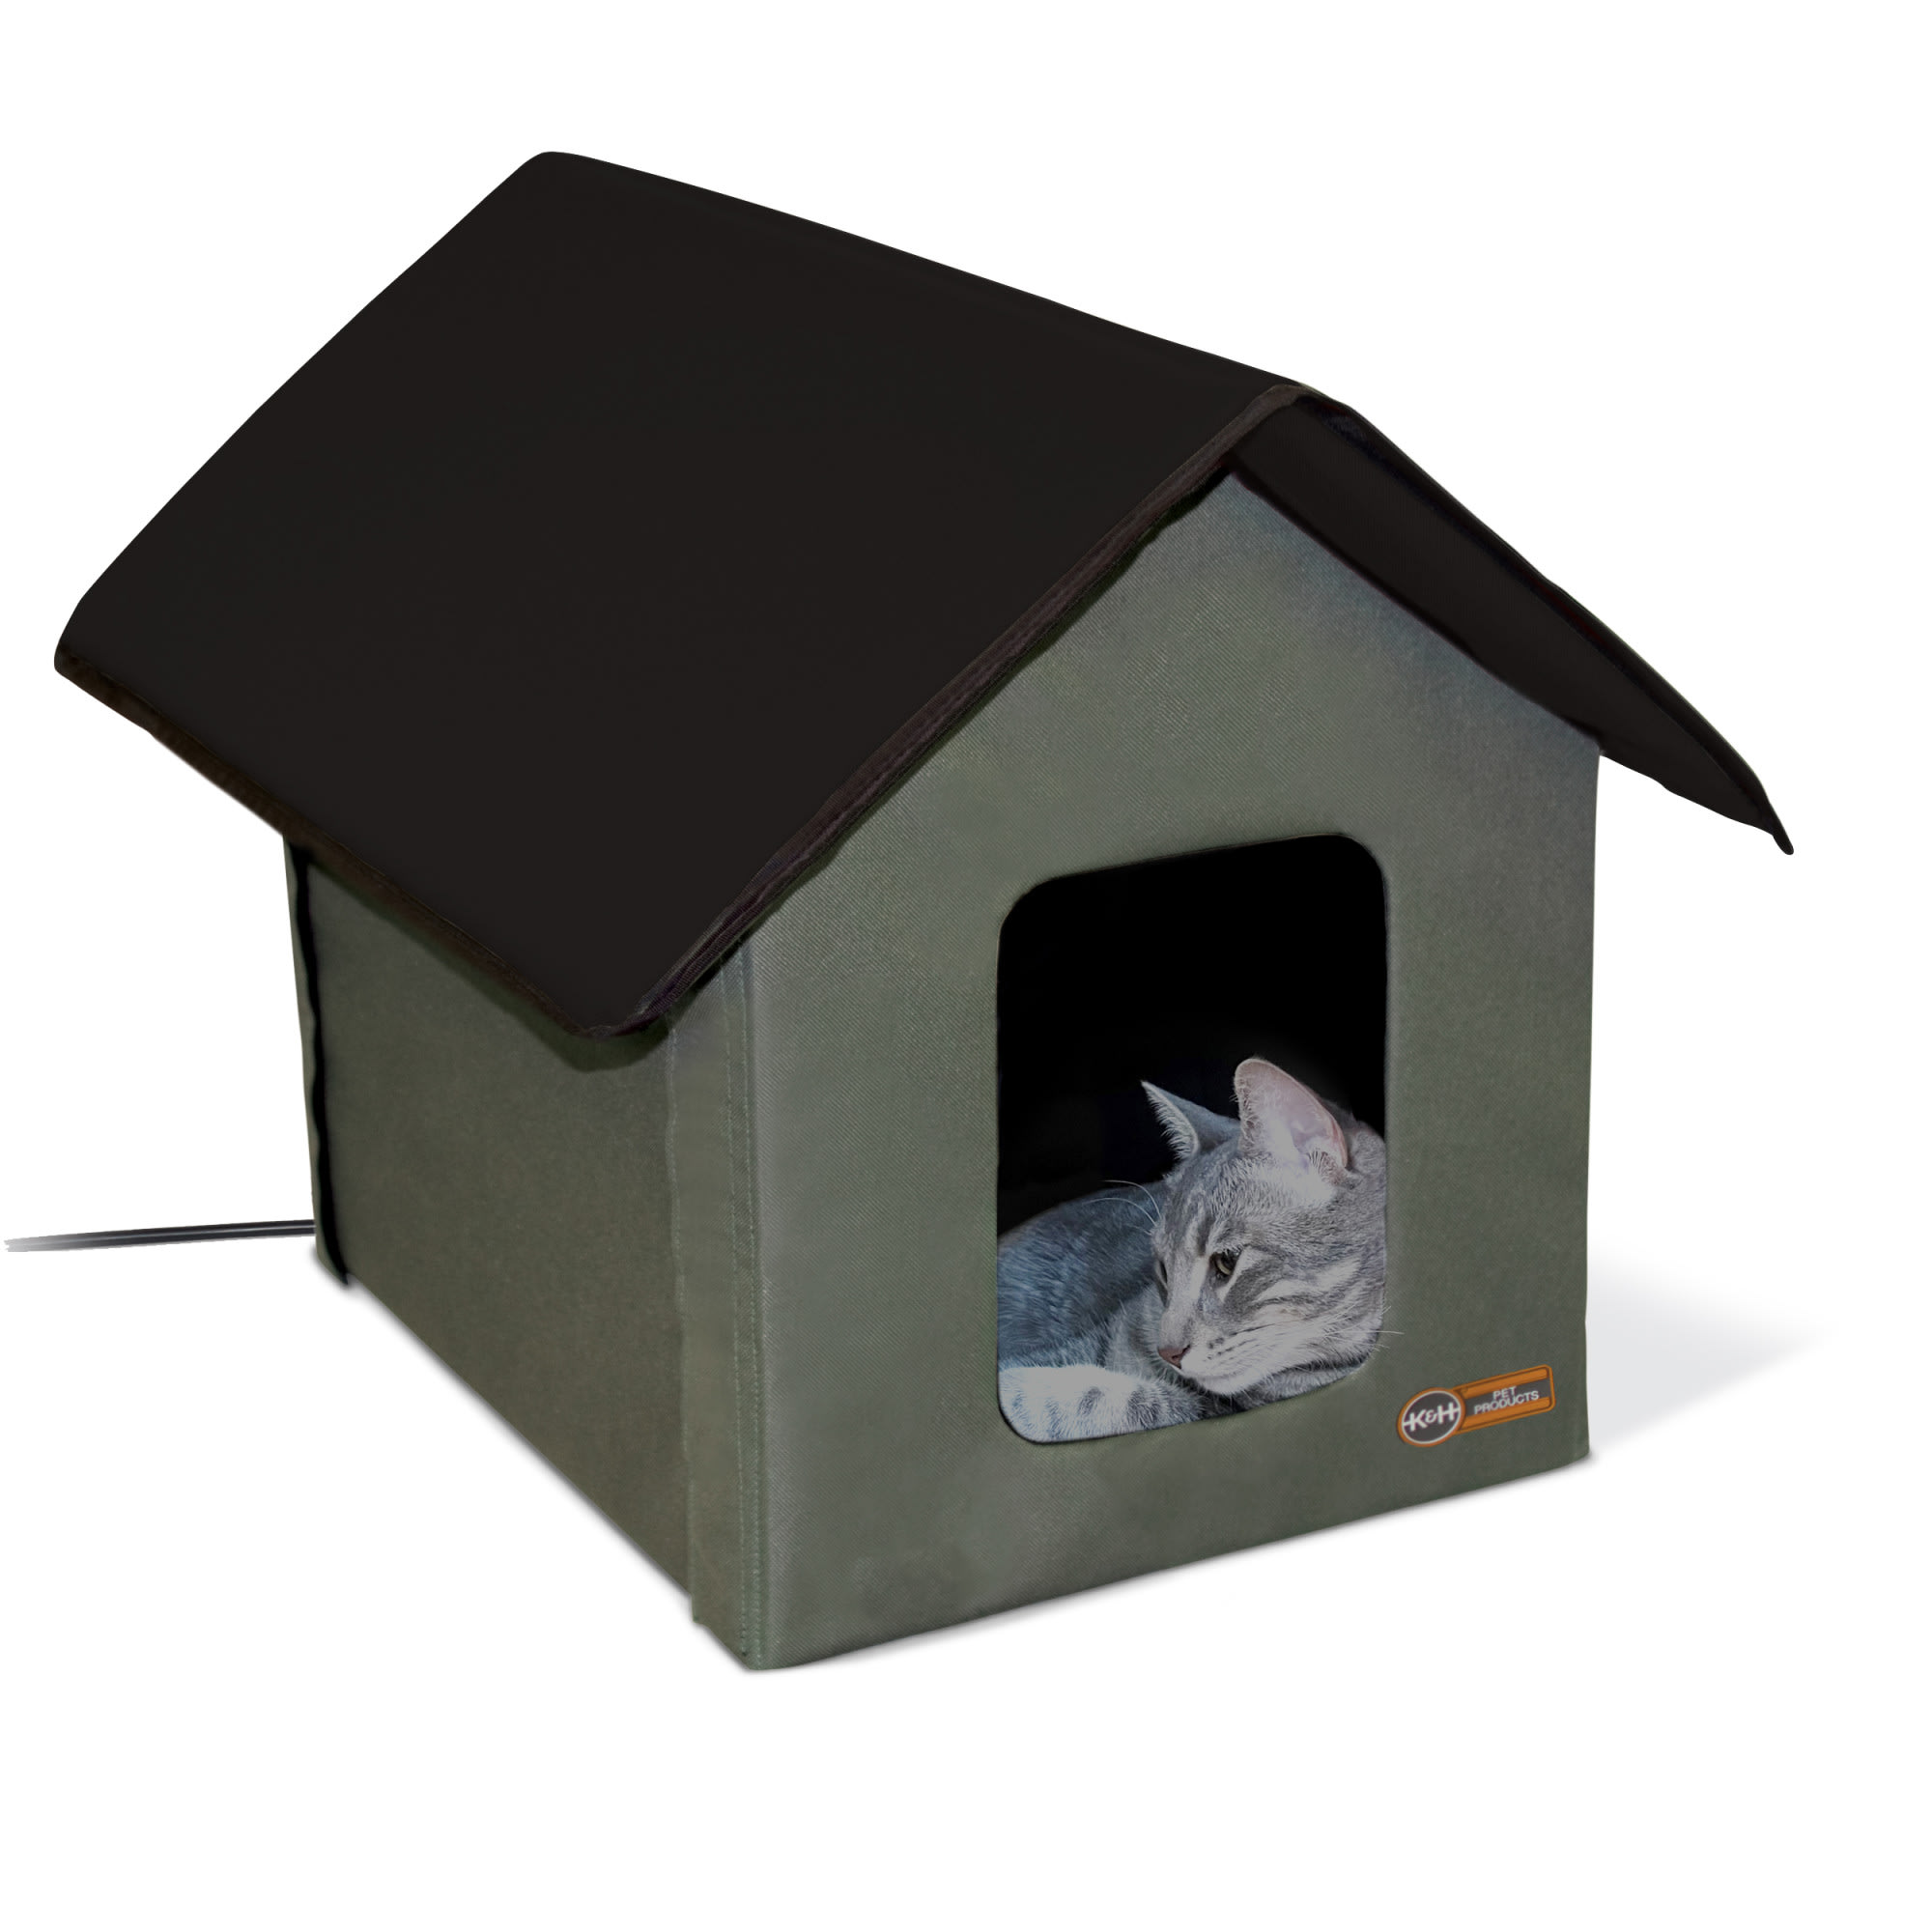 K&H Outdoor Heated Kitty House Cat Shelter, 19